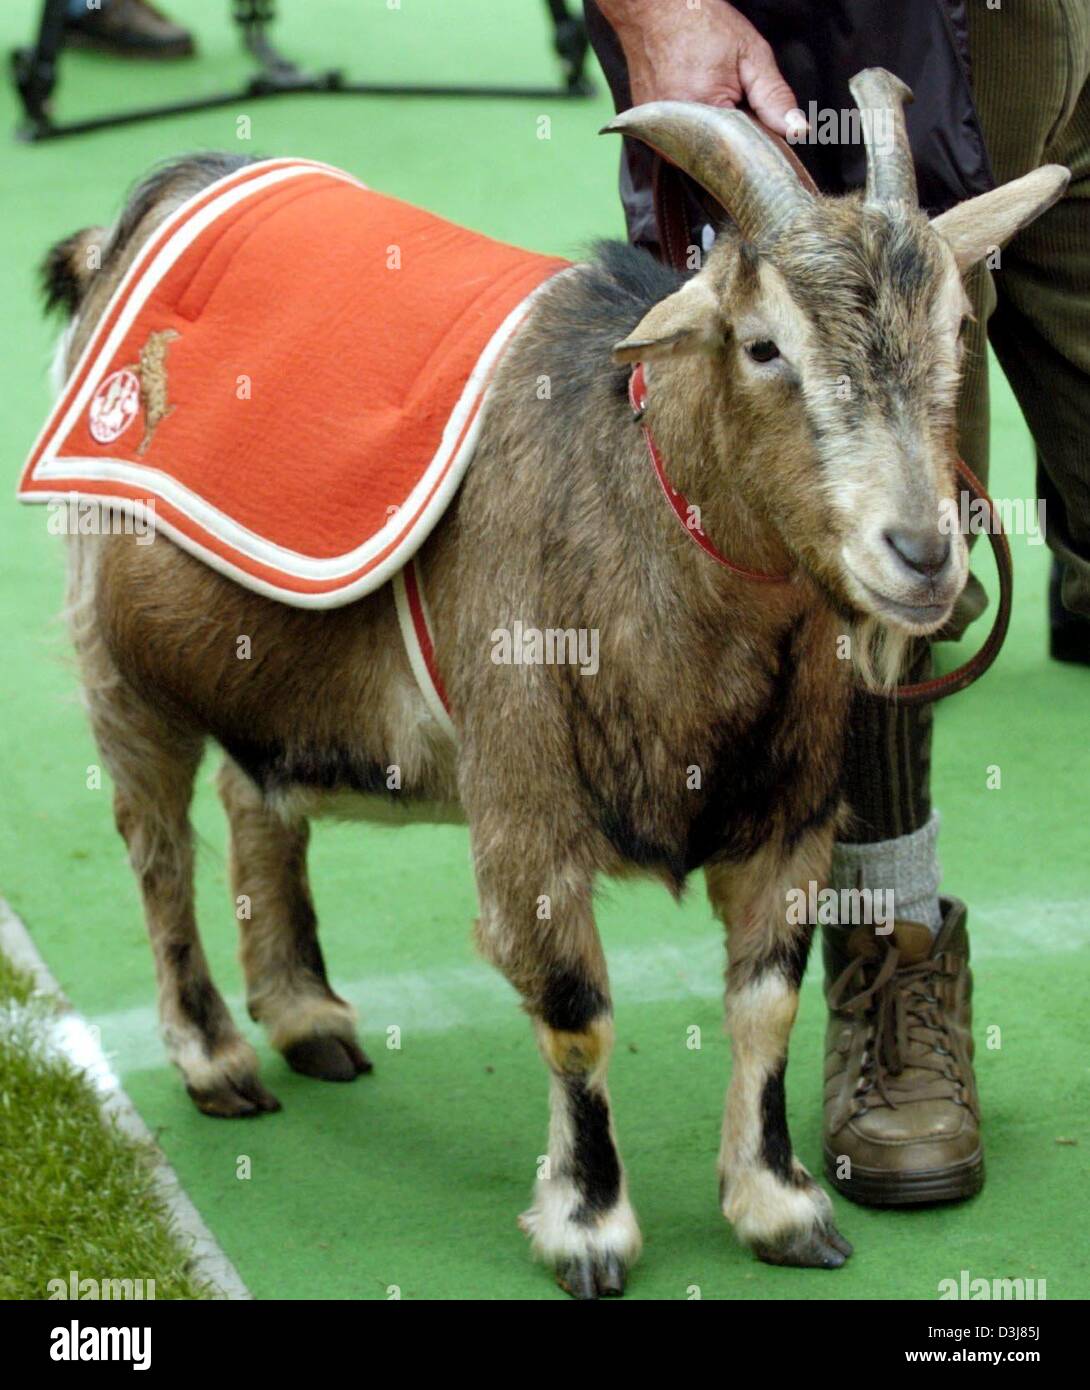 (dpa) - The mascot of German Bundesliga soccer club 1.FC Cologne, named 'Hennes VII' in a picture taken at the RheinEnergie Stadium in Cologne, Germany, 1 May 2004. The mascot did not hold much luck for the club this season since Cologne is already assured of last place in Germany's top soccer league and will be relegated to the second division after the season. Stock Photo